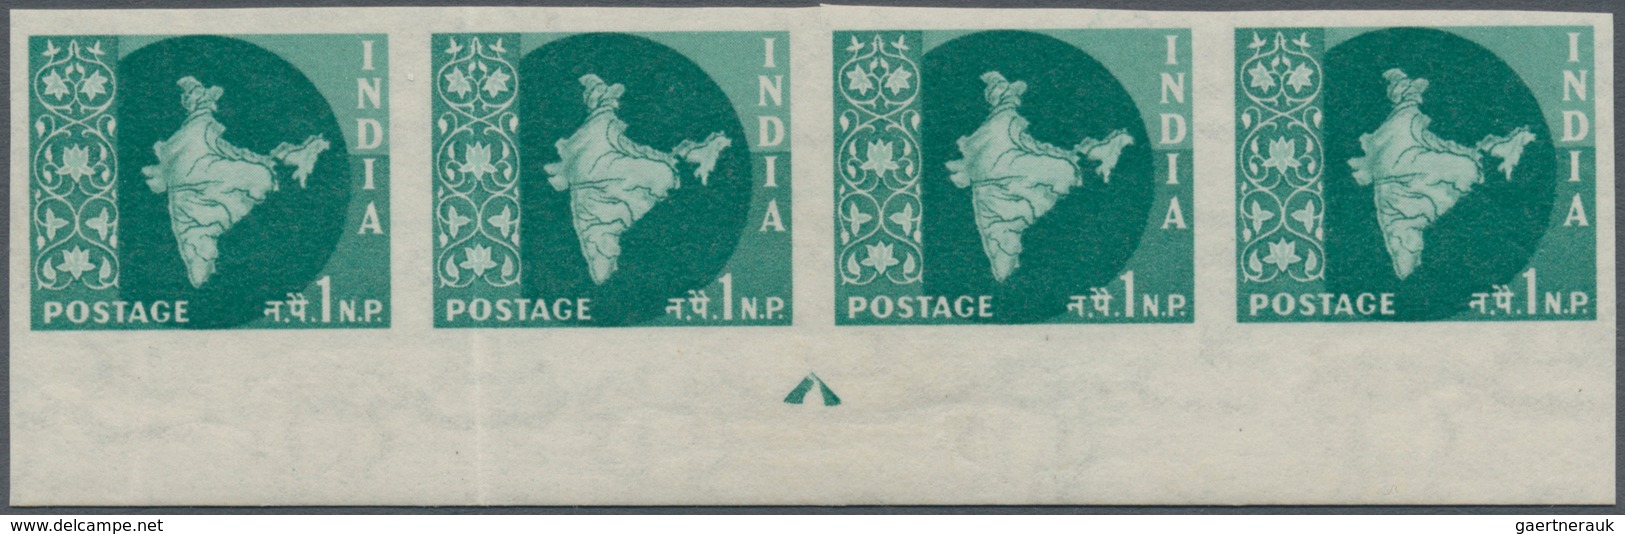 Indien: 1958-63 'Map Of India' 1n.p. Blue-green, Wmk. Asokan Capital, IMPERFORATED CENTRAL BOTTOM MA - 1852 District De Scinde